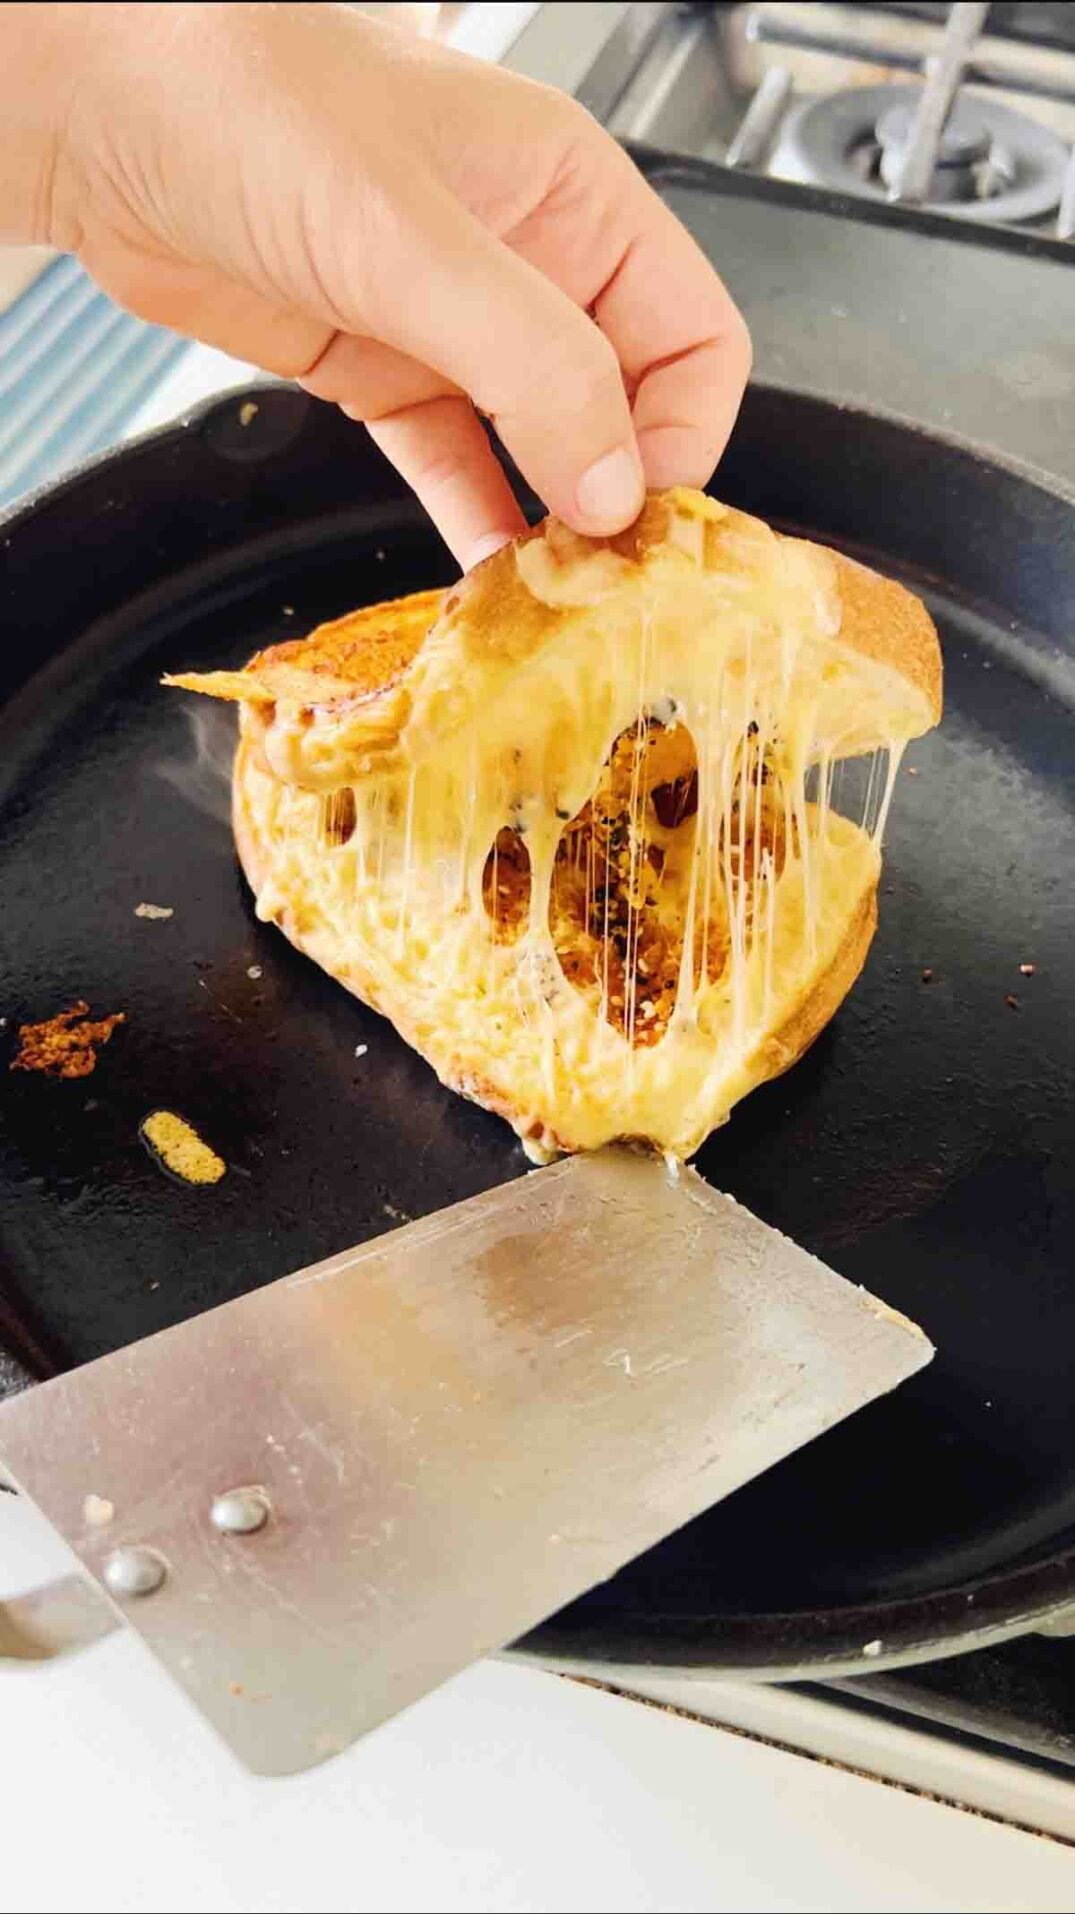 a hand opening up a grilled cheese with the cheese stretching.